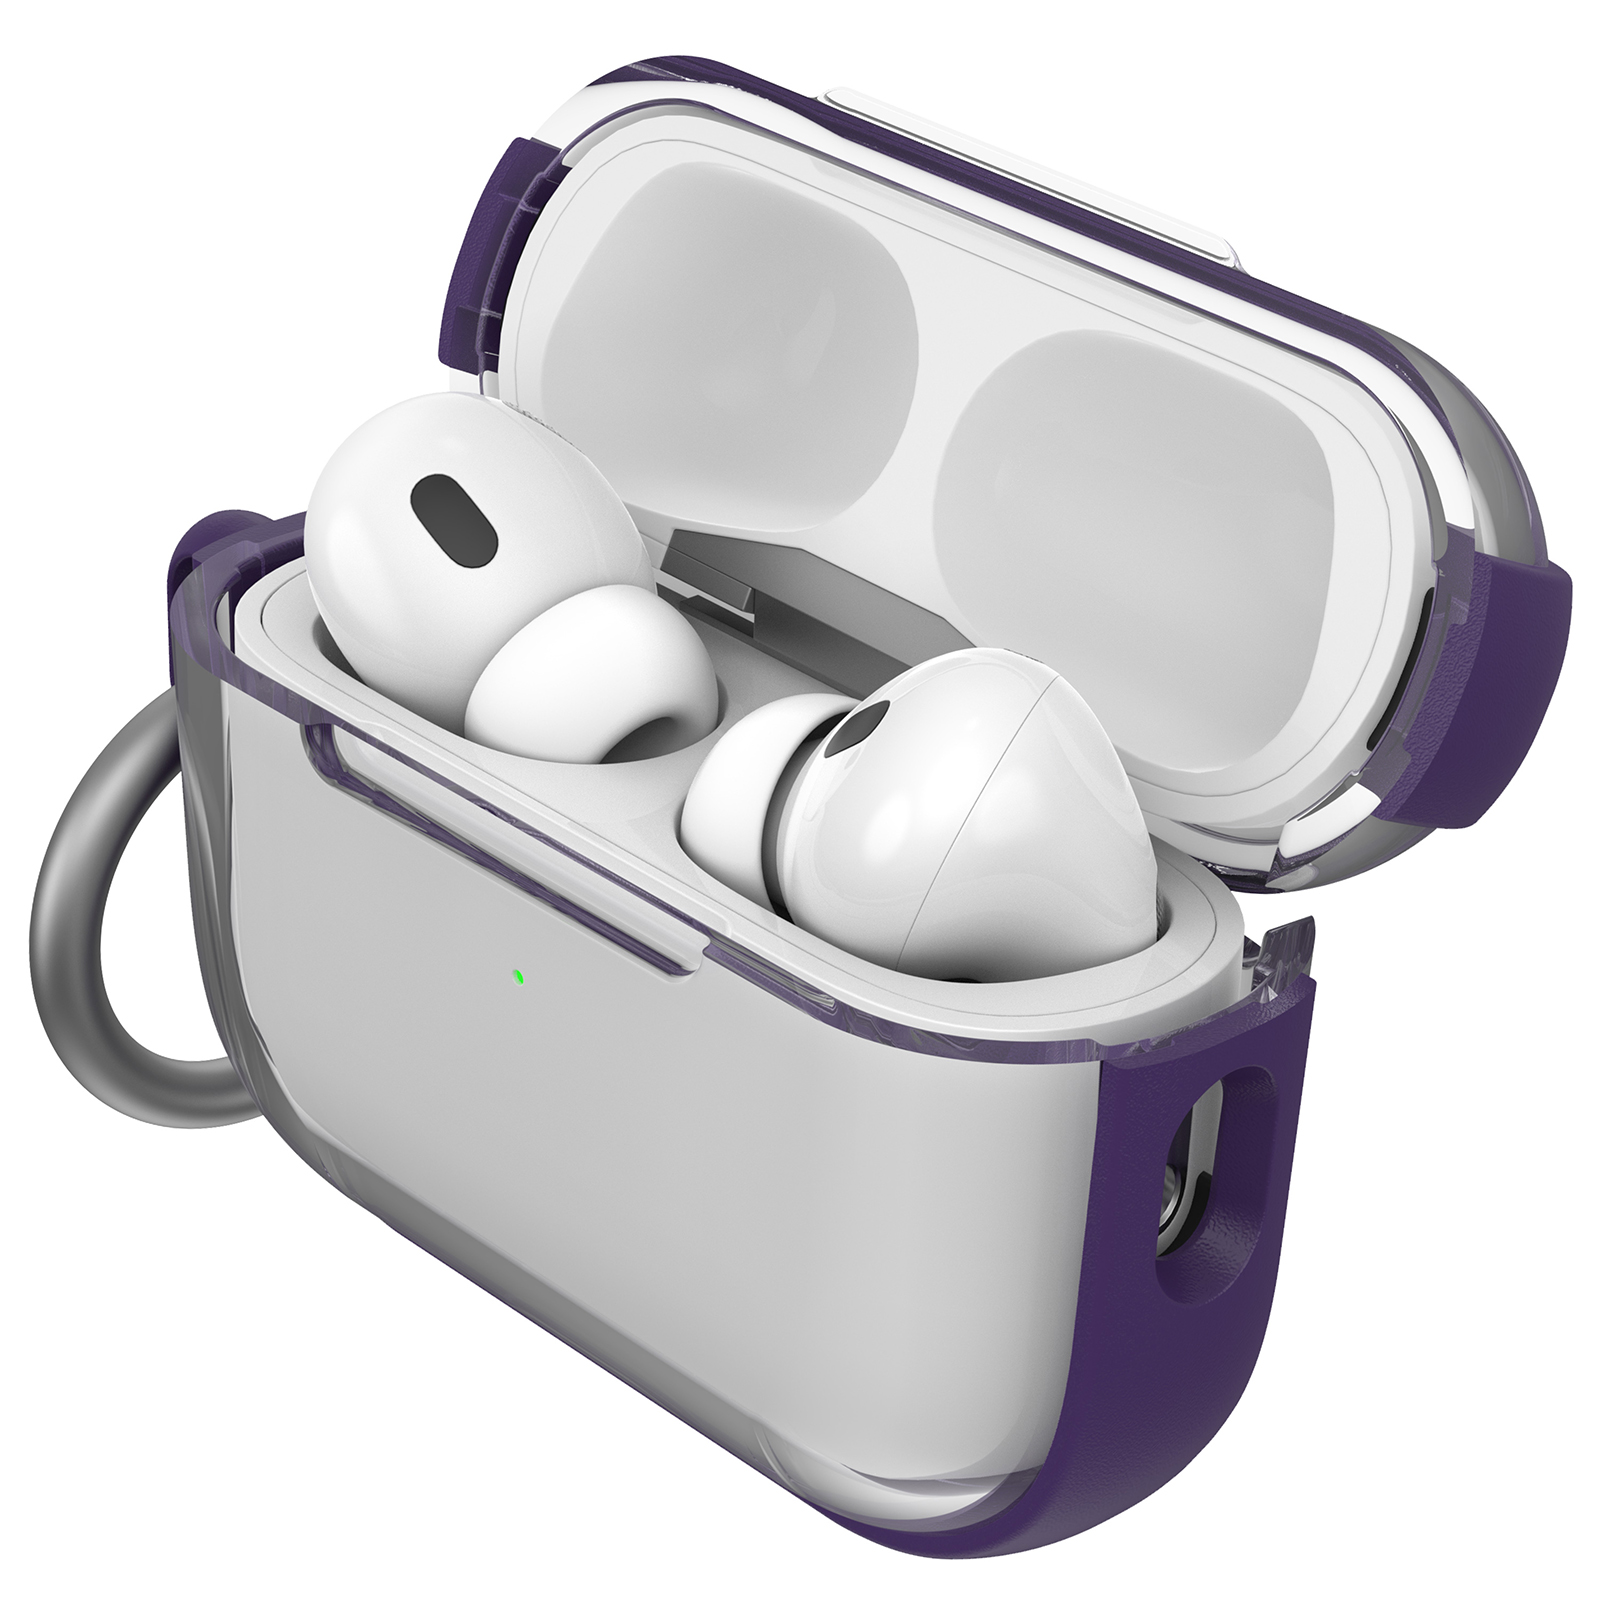 AppleAirPods Pro 第二世代 (MQD83J/A)  保証期間7月10日まで